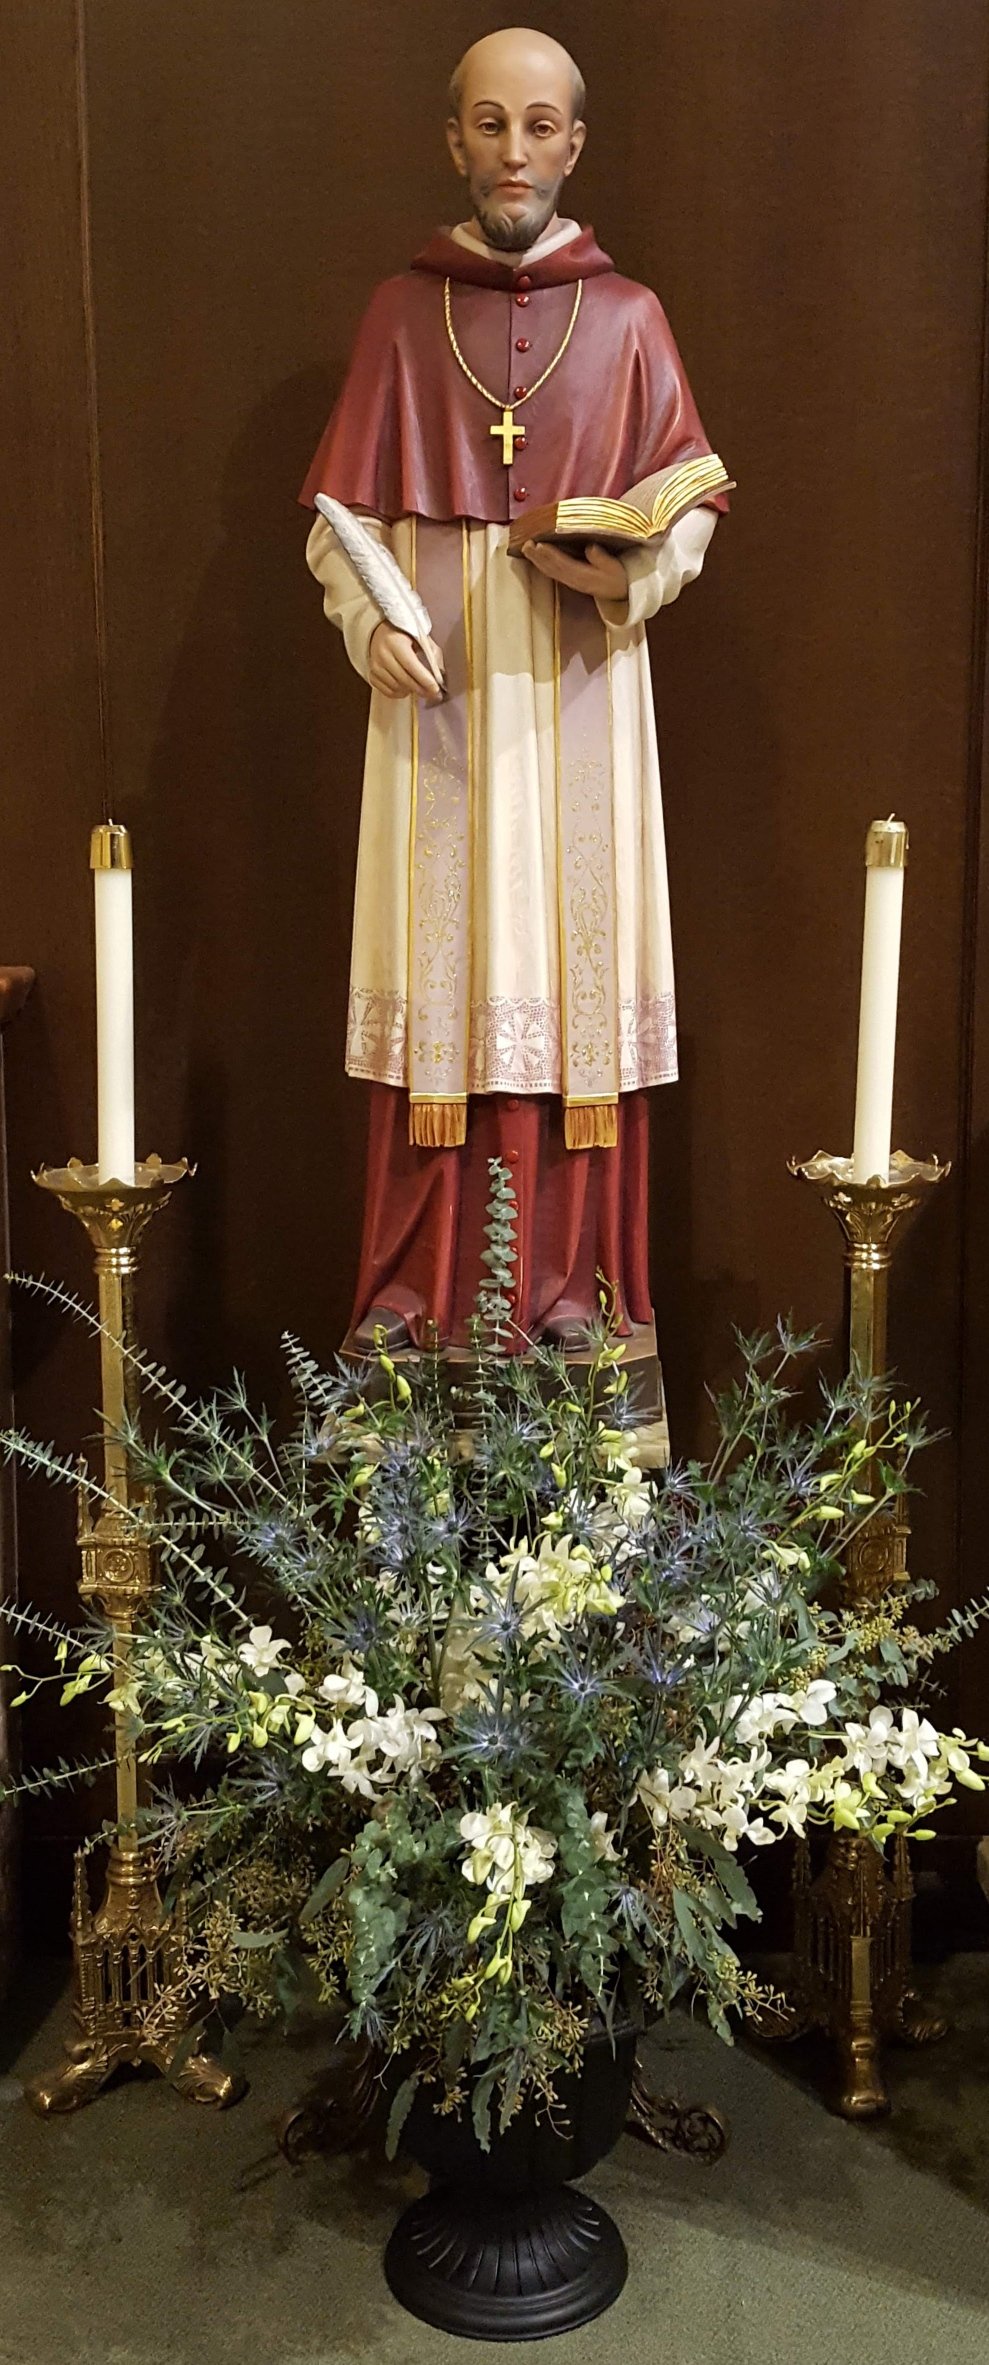 Our Mother of Consolation, Philadelphia, PA